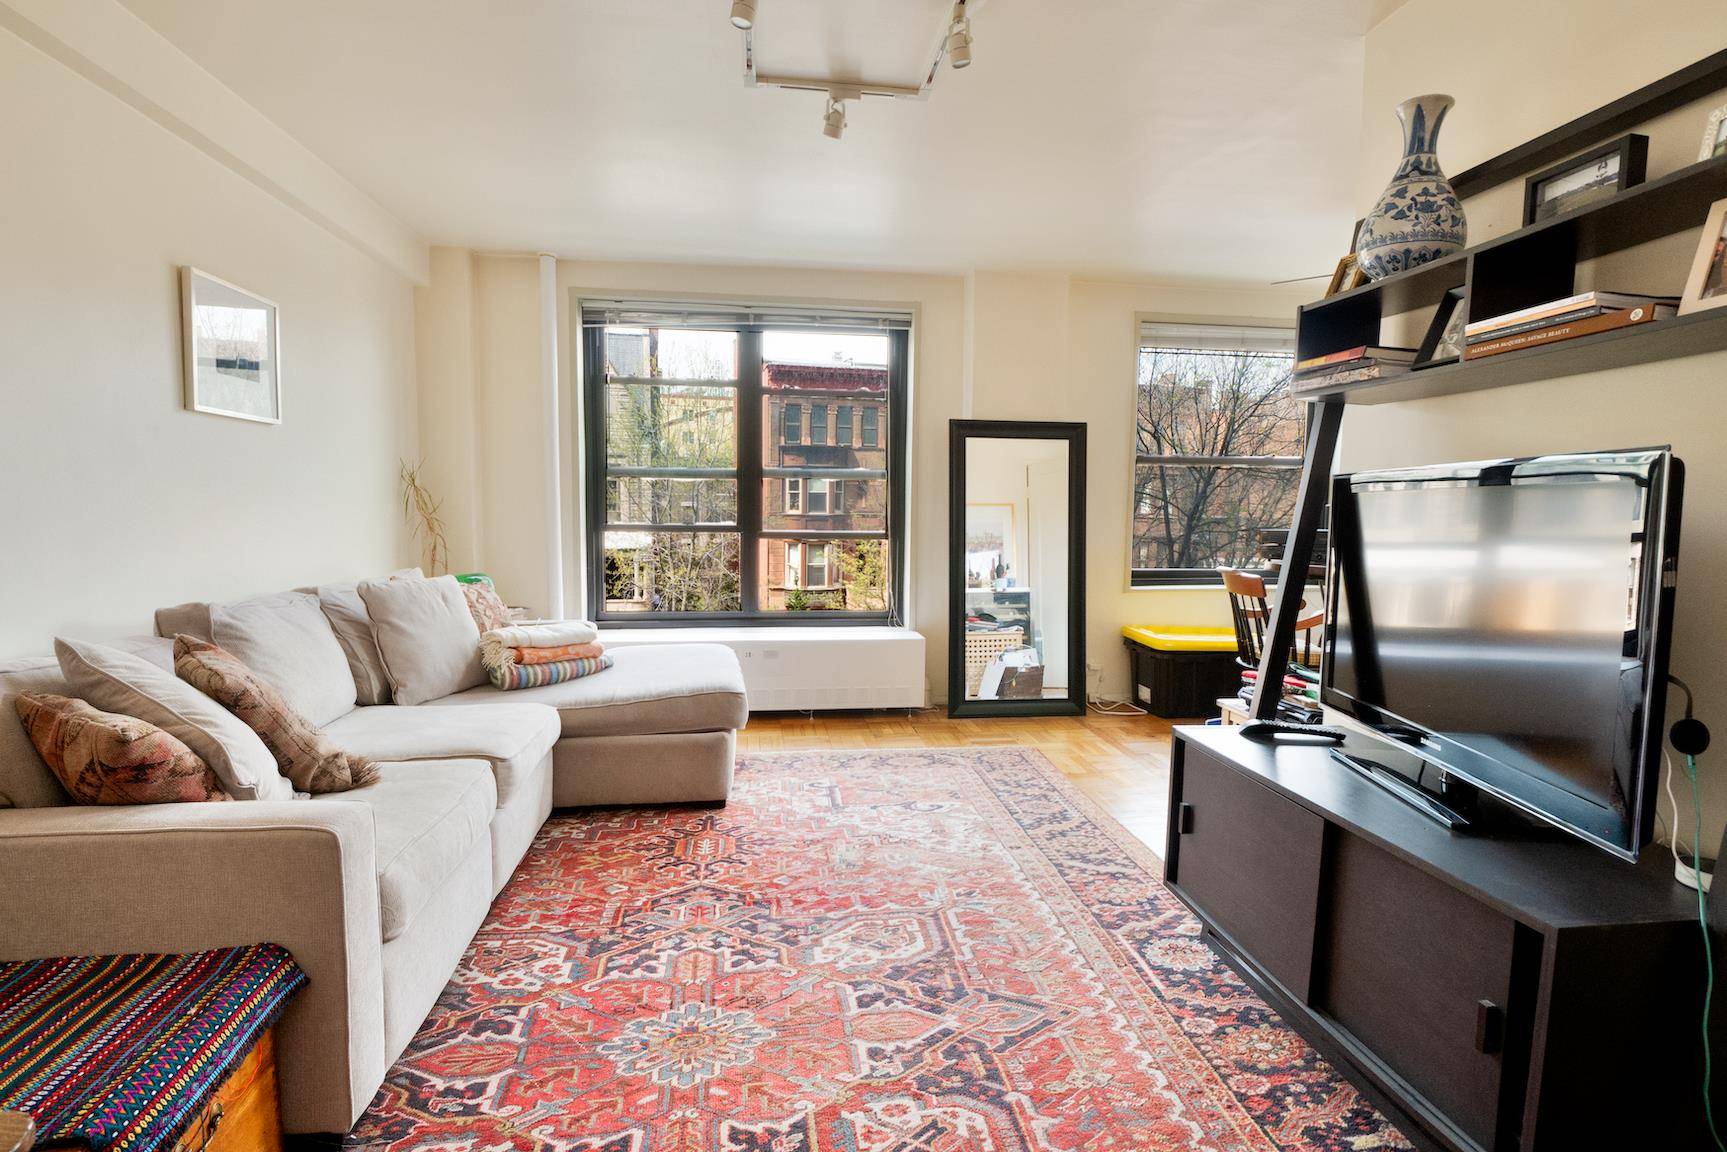 Phenomenal opportunity to own a one bedroom apartment in popular Clinton Hill.